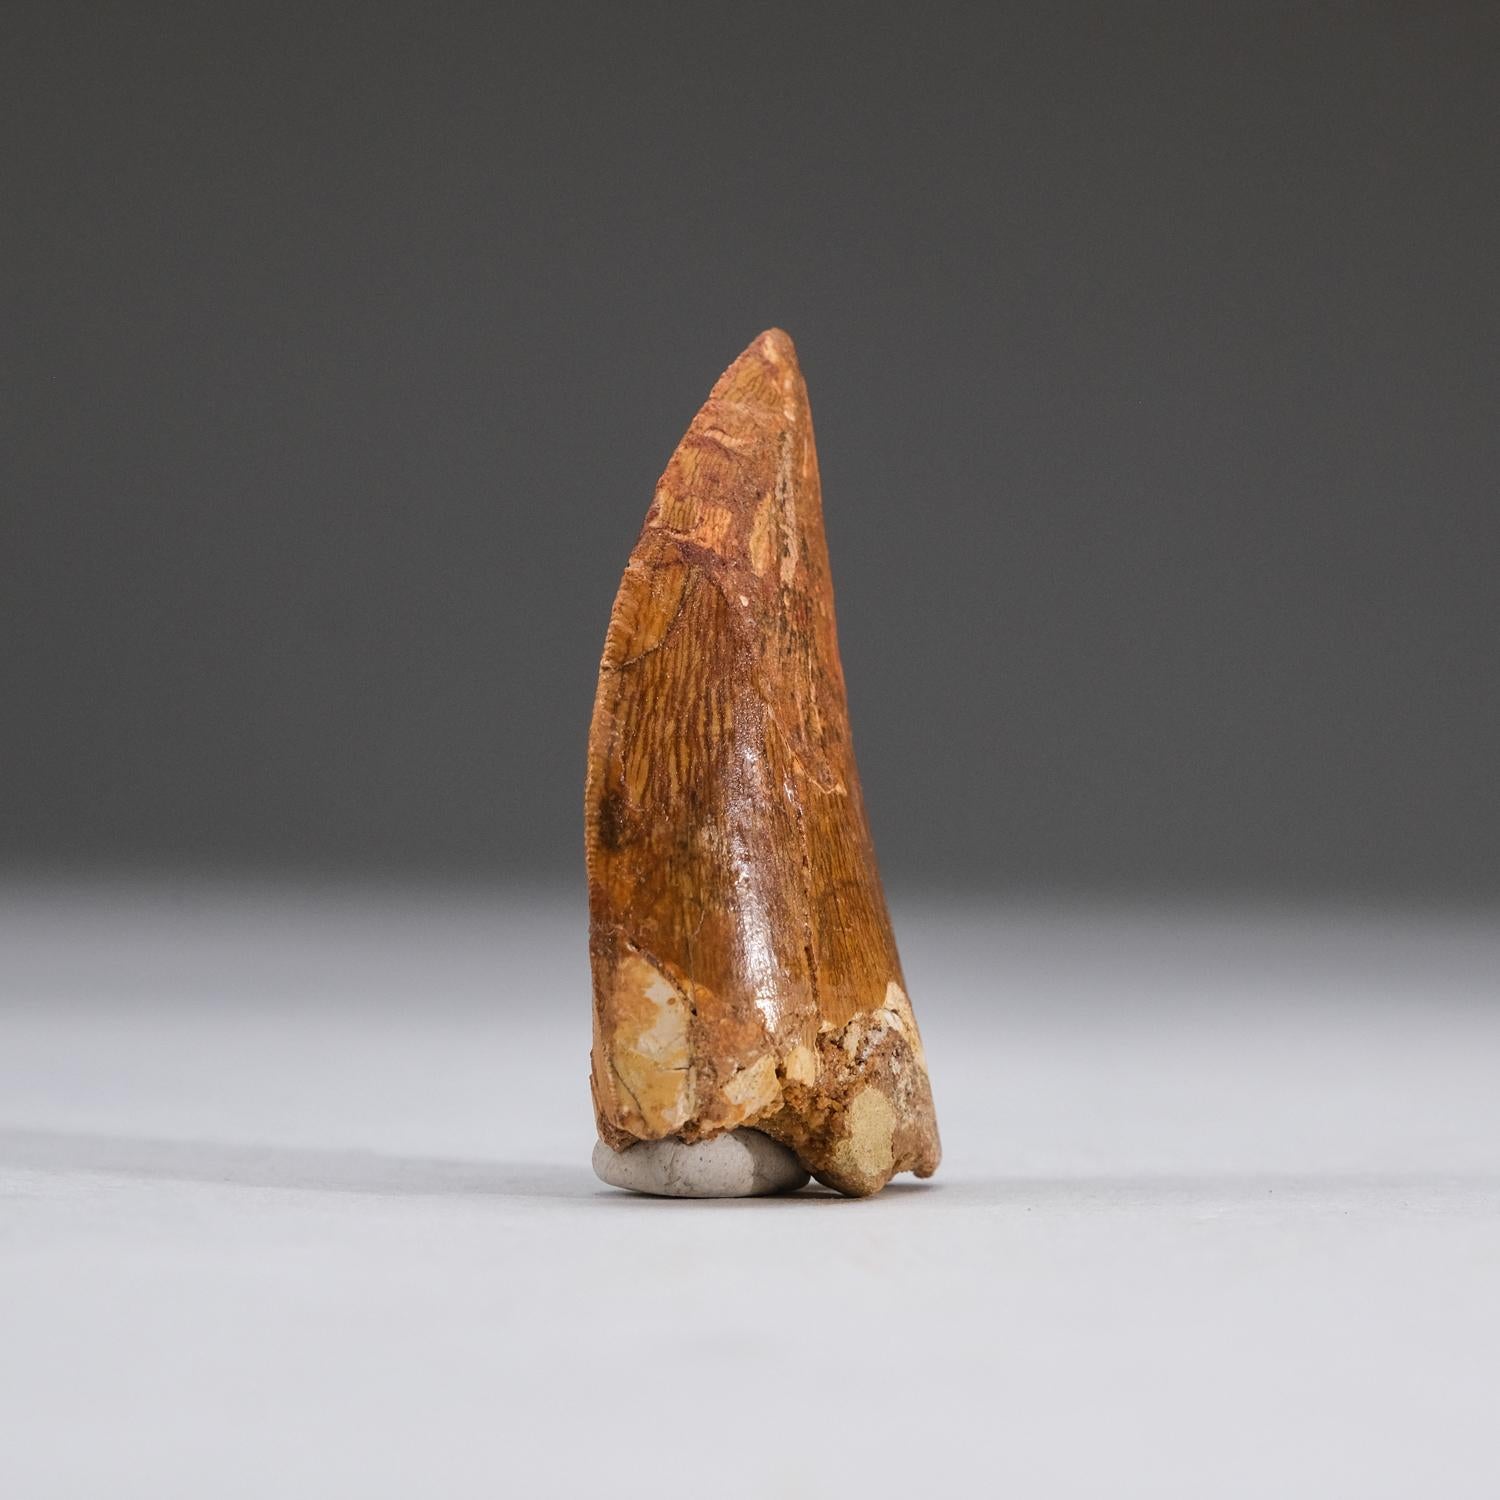 18th Century and Earlier Genuine Carcharodontosaurus Tooth in Display Box (11 grams) For Sale